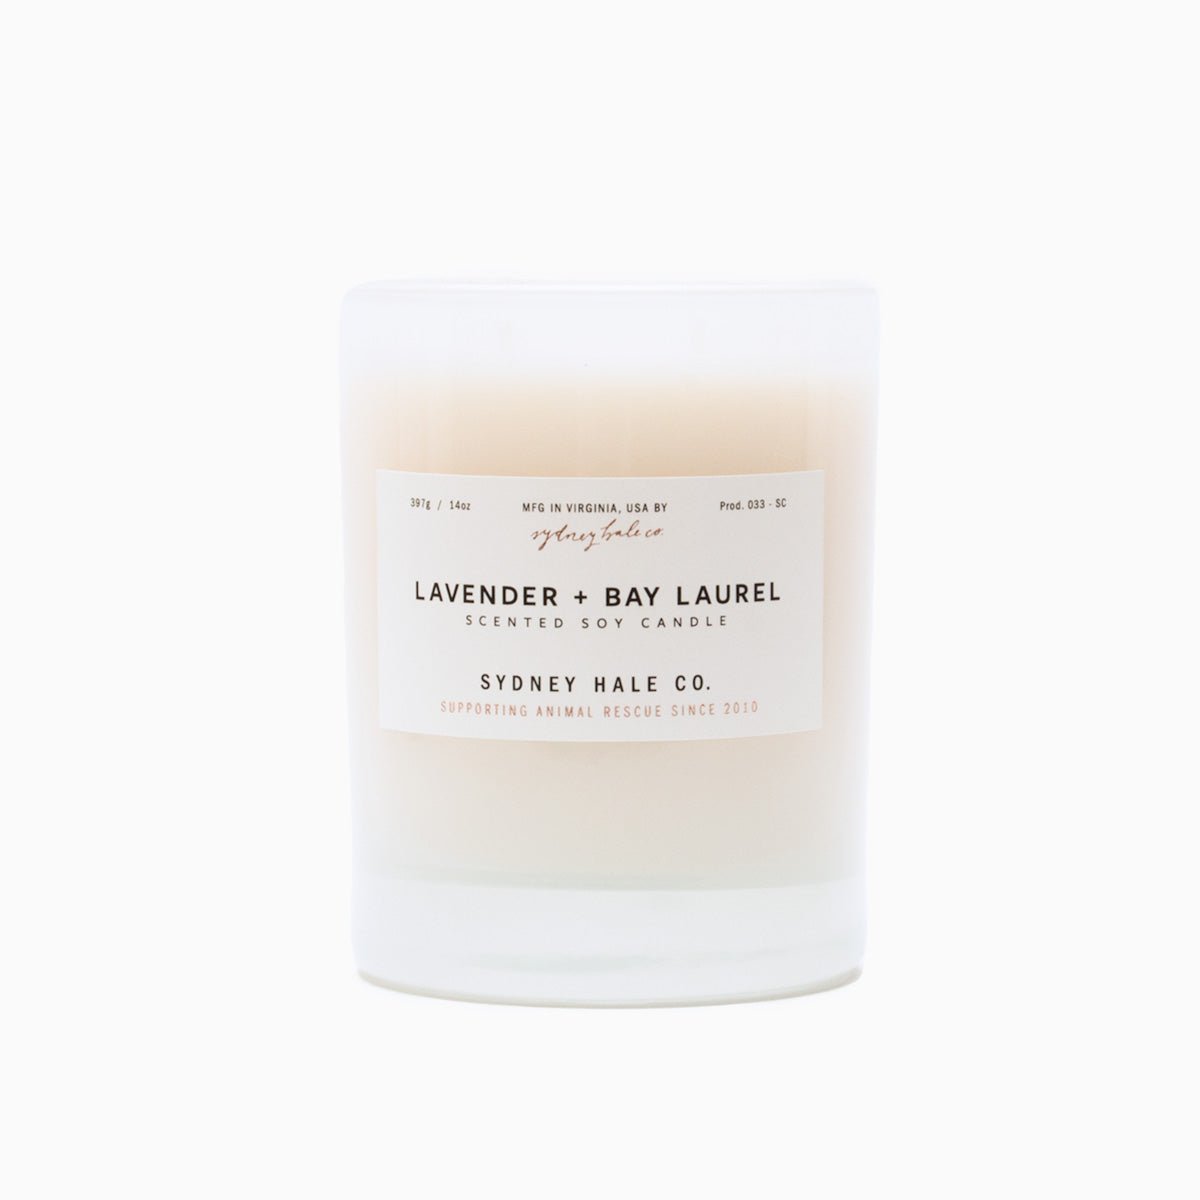  A cylindrical glass candle filled with a soy wax blend and two double cotton wicks. Label reads: "397g/14 oz. Manufactured in Virginia, USA by Sydney Hale Co. Lavender + Bay Laurel scented soy candle. Sydney Hale Co. Supporting Animal rescue since 2010."